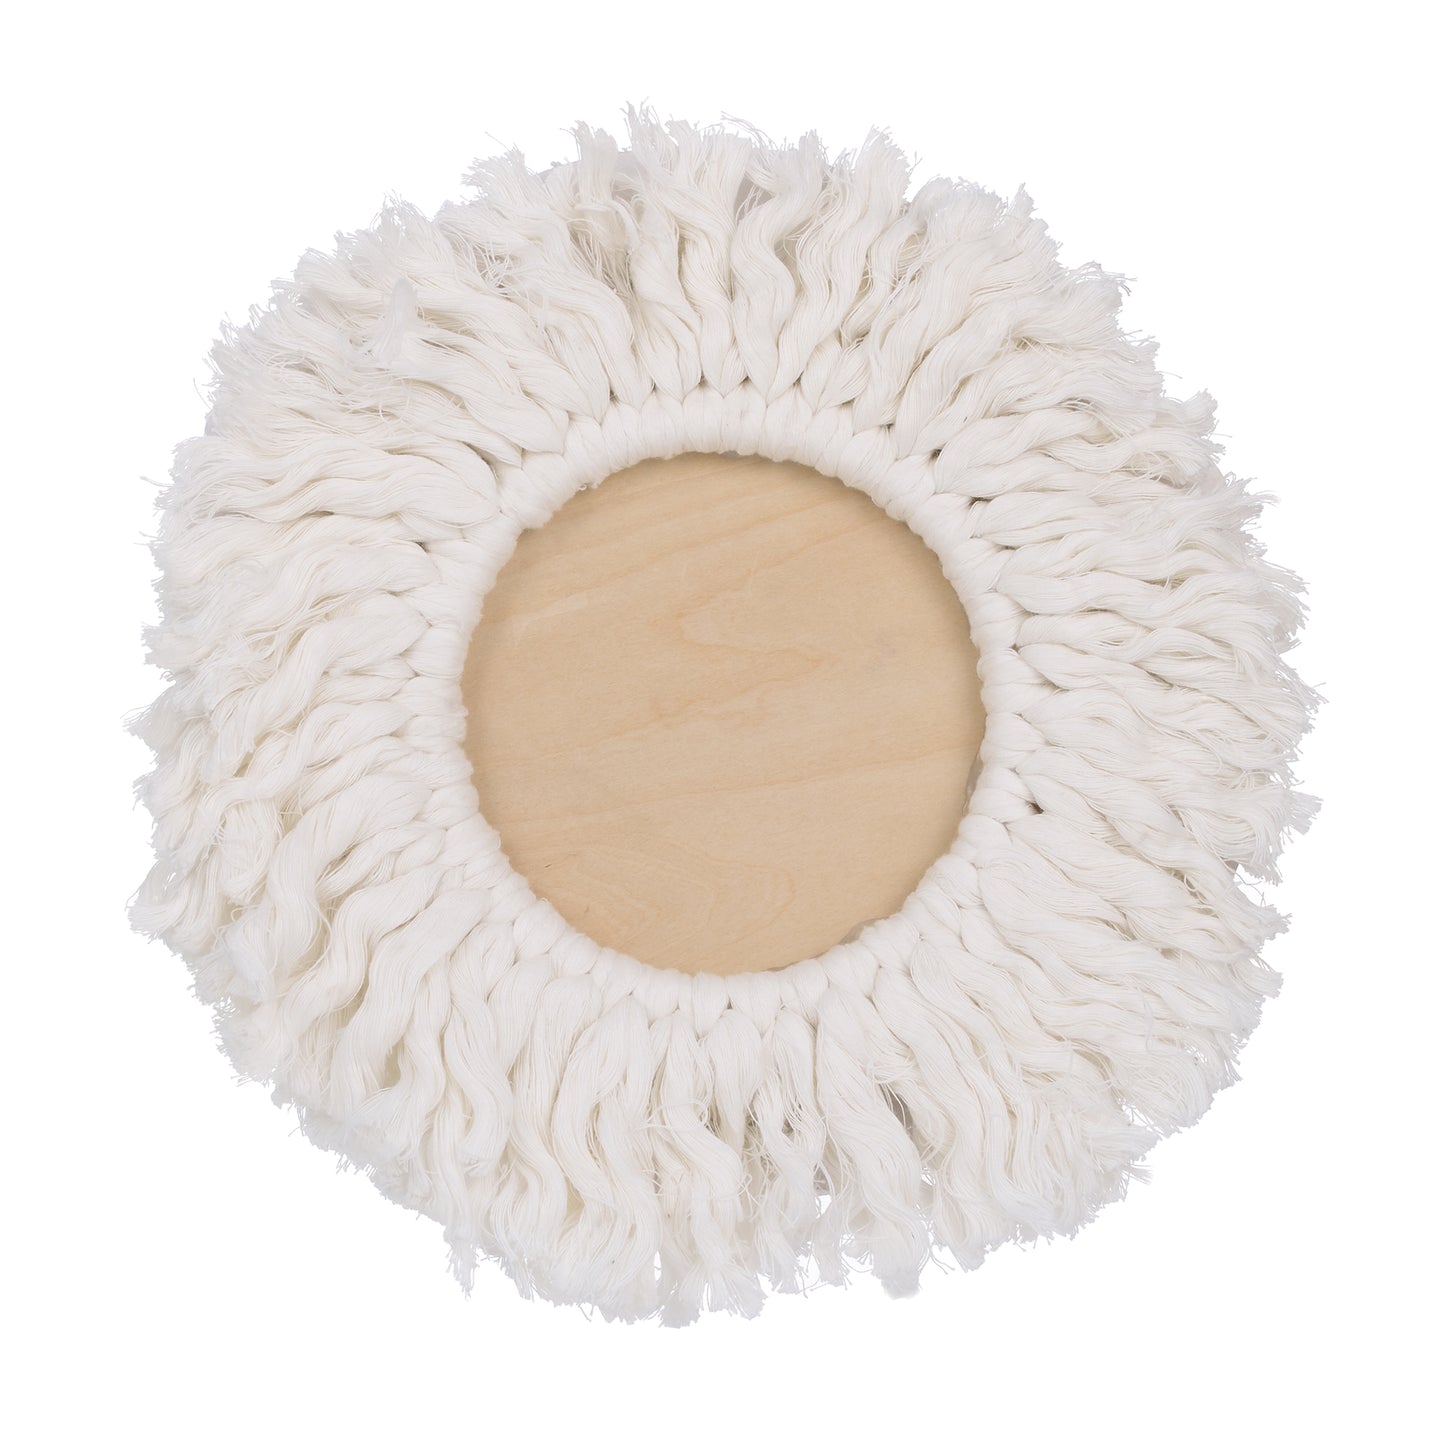 Little Love by NoJo Natural Wood Lion Wall Décor with Ivory Yarn Mane